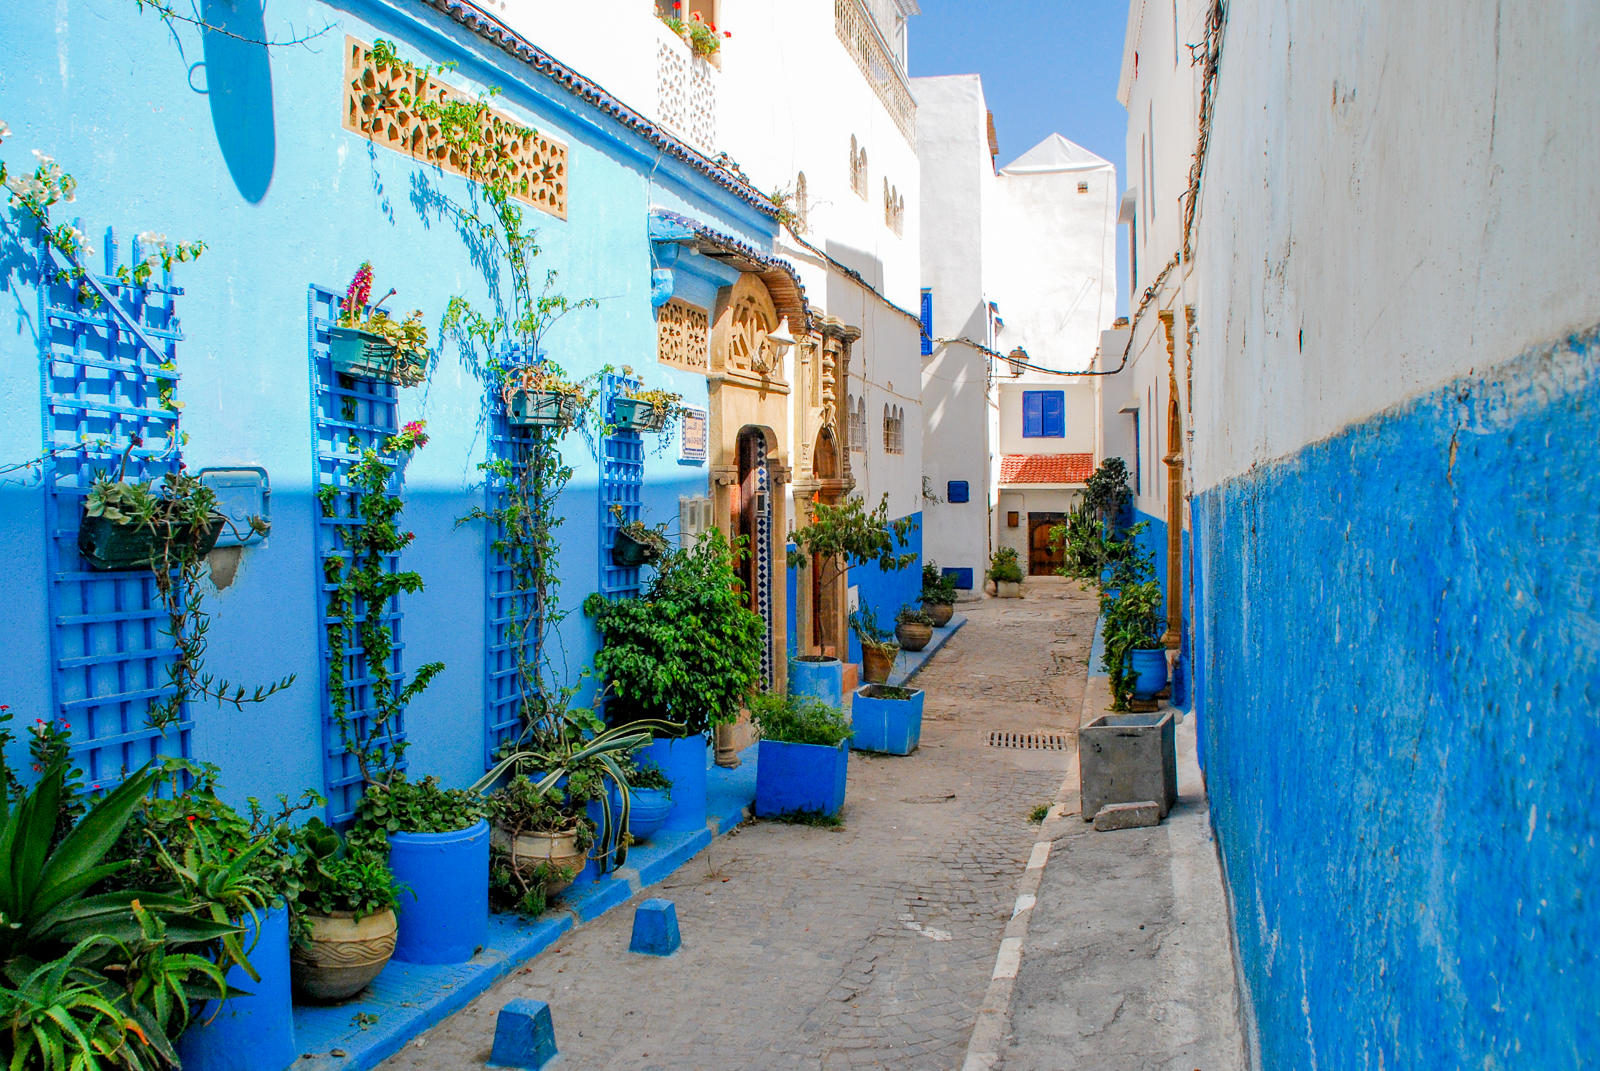 A colourful street in Morocco's capital, Rabat